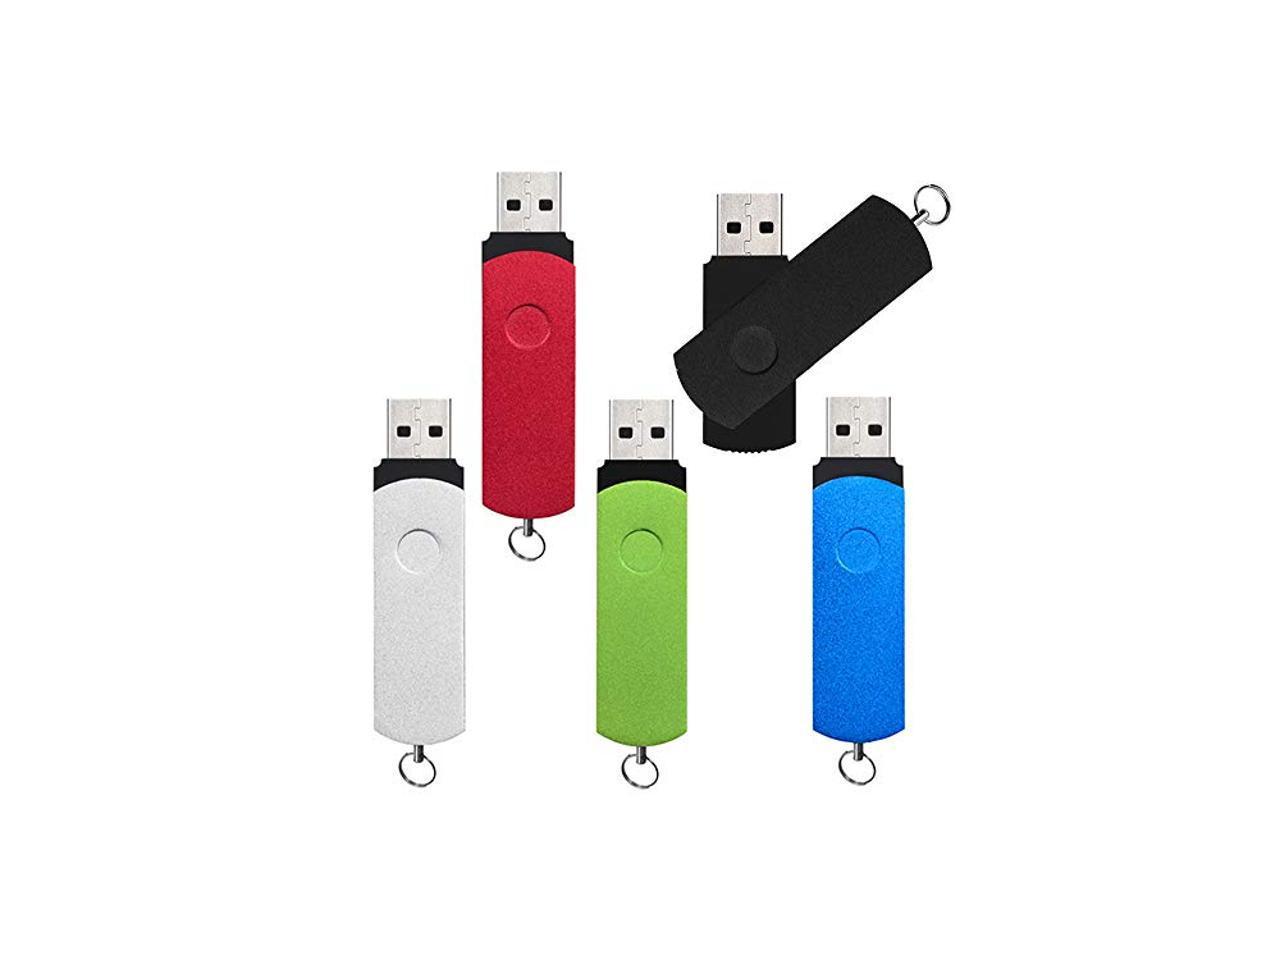 USB 3.0 Flash Drive 3 Pack 32GB Metal Thumb Drives High Speed Jump Drive Multicolor Memory Sticks Key Shape for Business Students Office Company by FEBNISCTE 